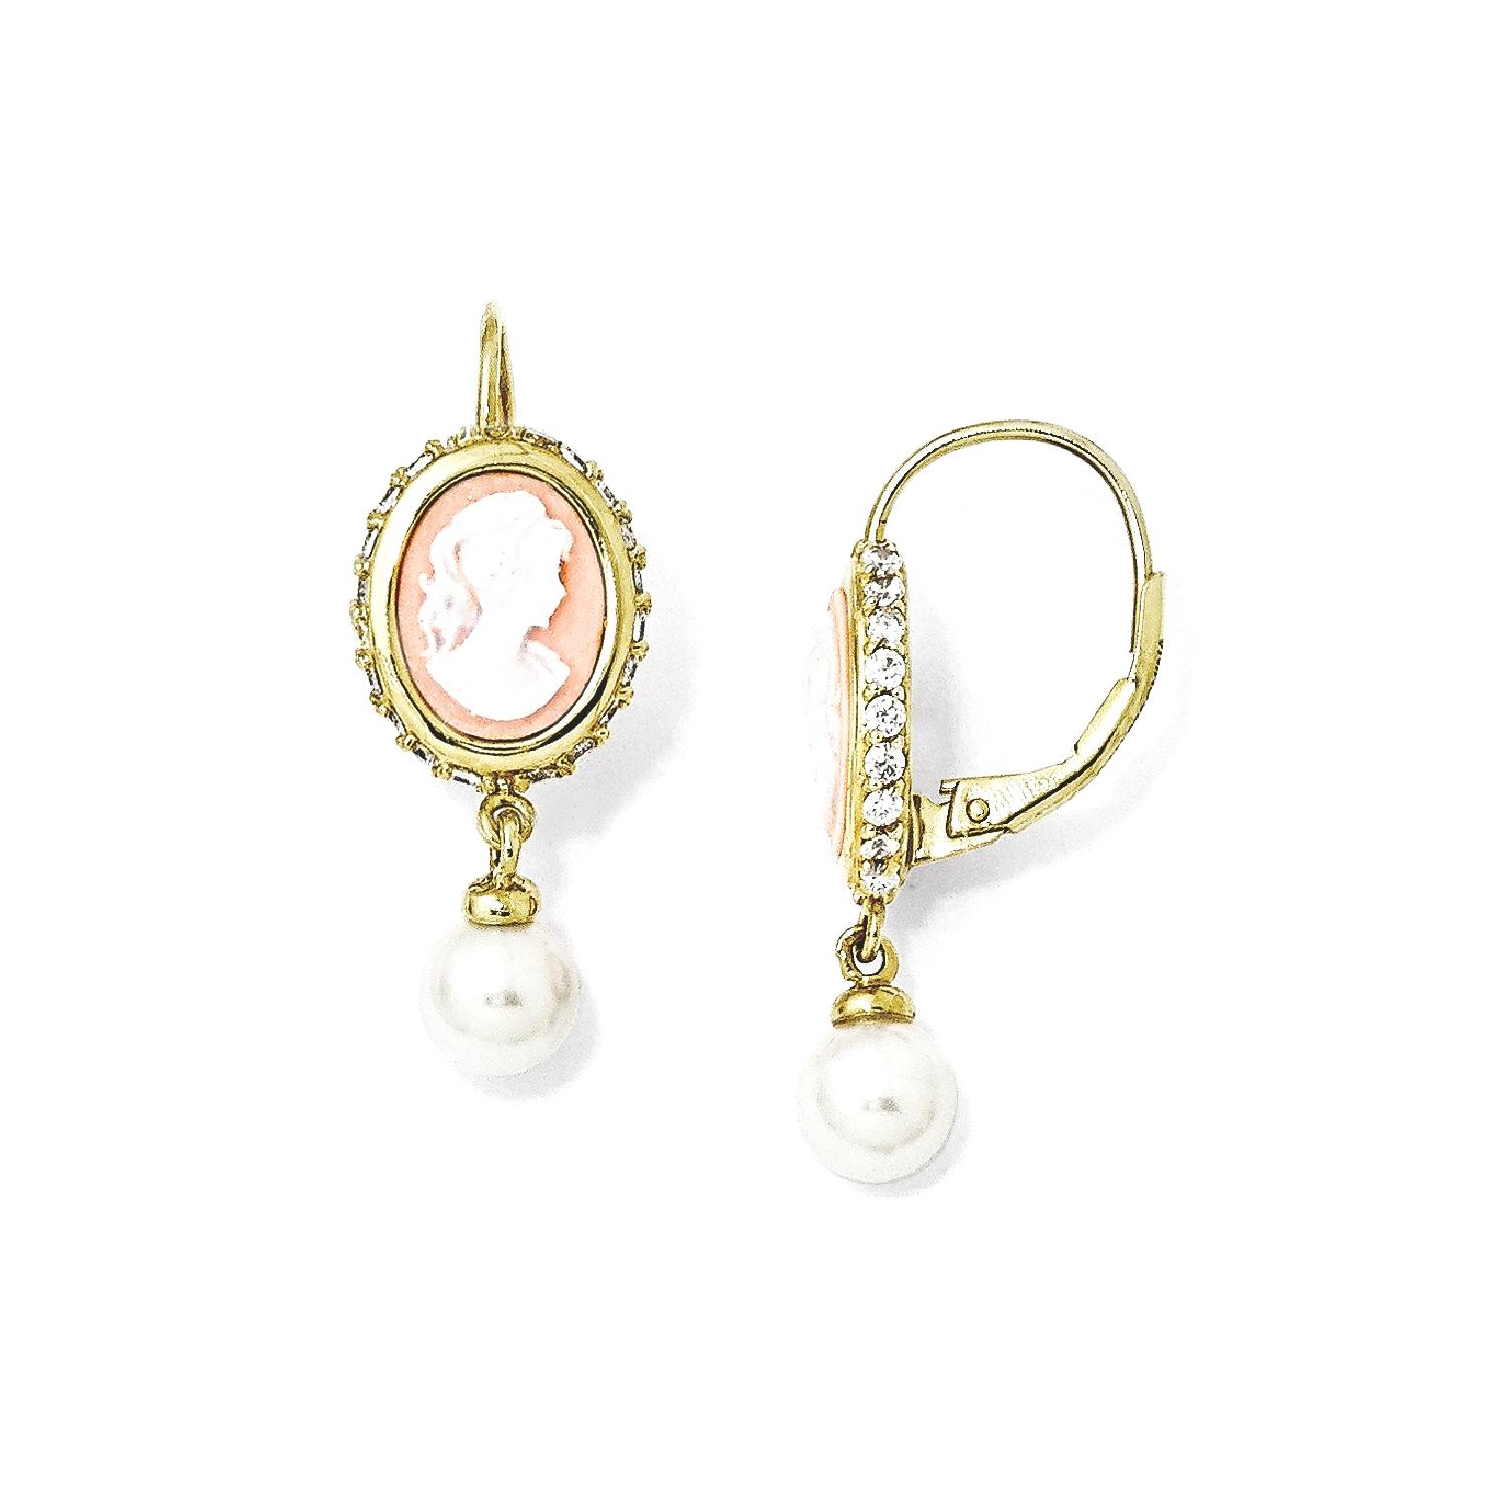 IceCarats 925 Sterling Silver Gold Plated Simulated Pearl/cameo/cz Leverback Earrings Lever Back For Women Drop Dangle